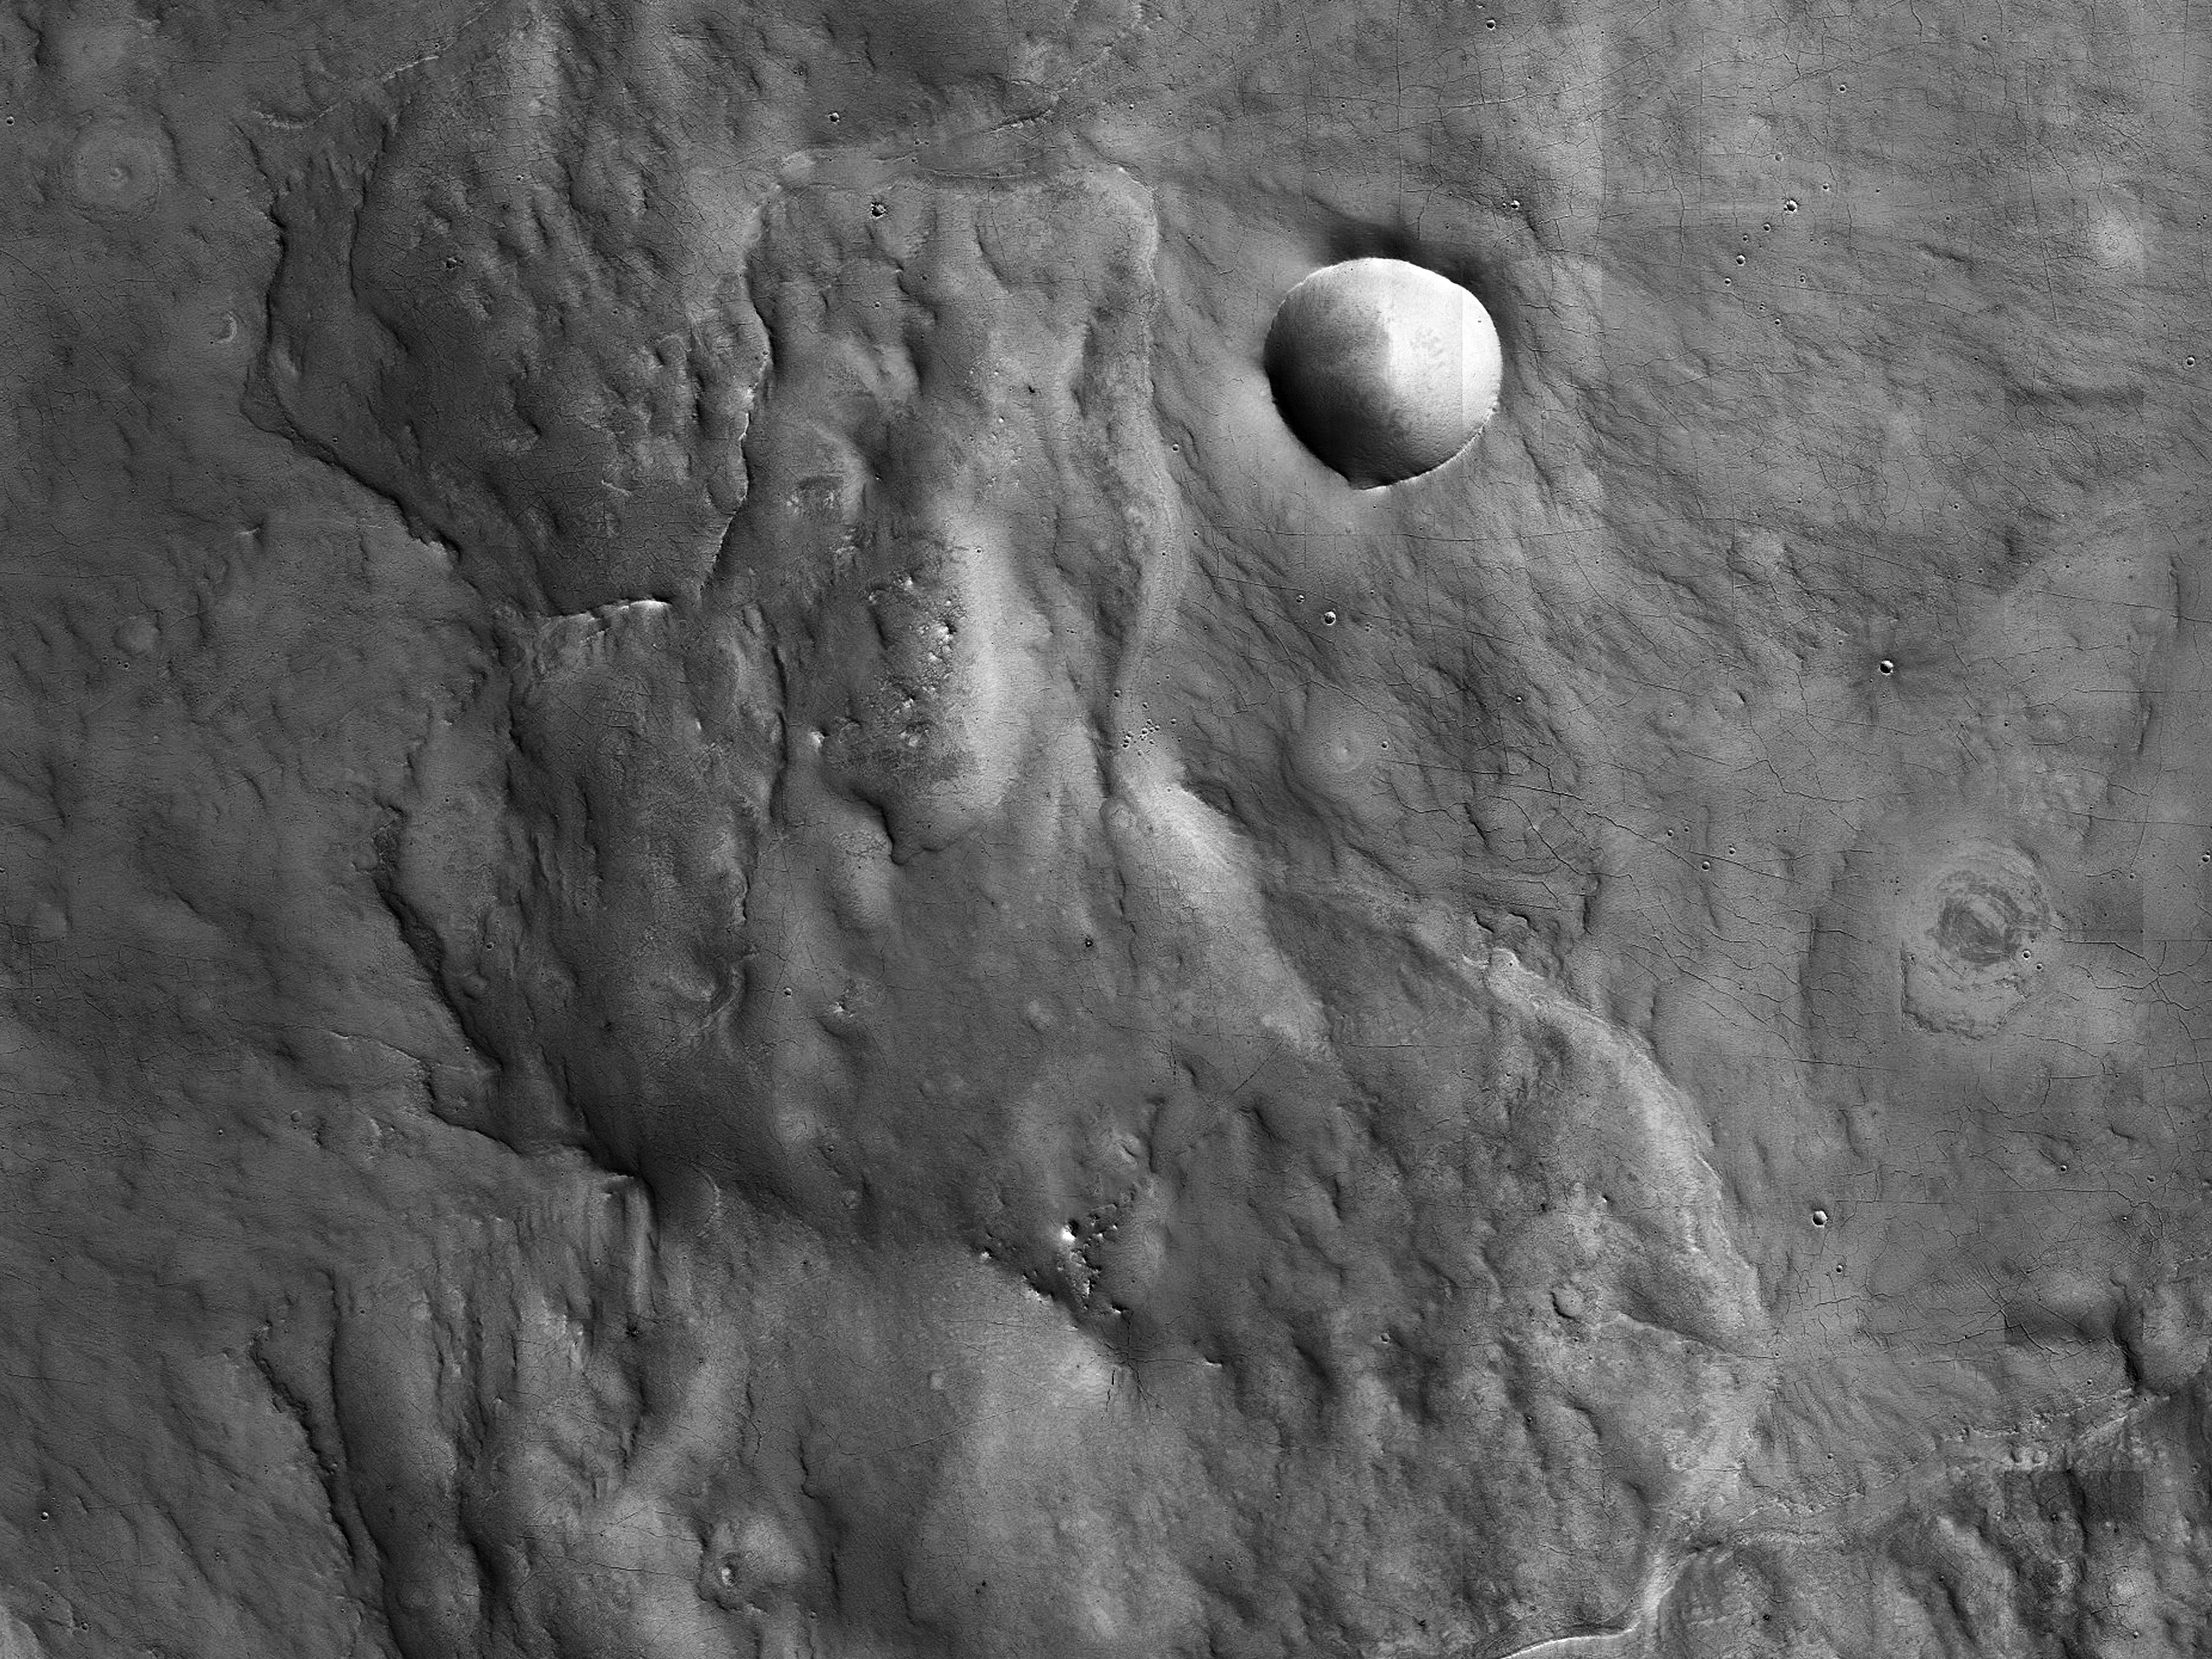 A Delta-Like Structure at Antoniadi Crater